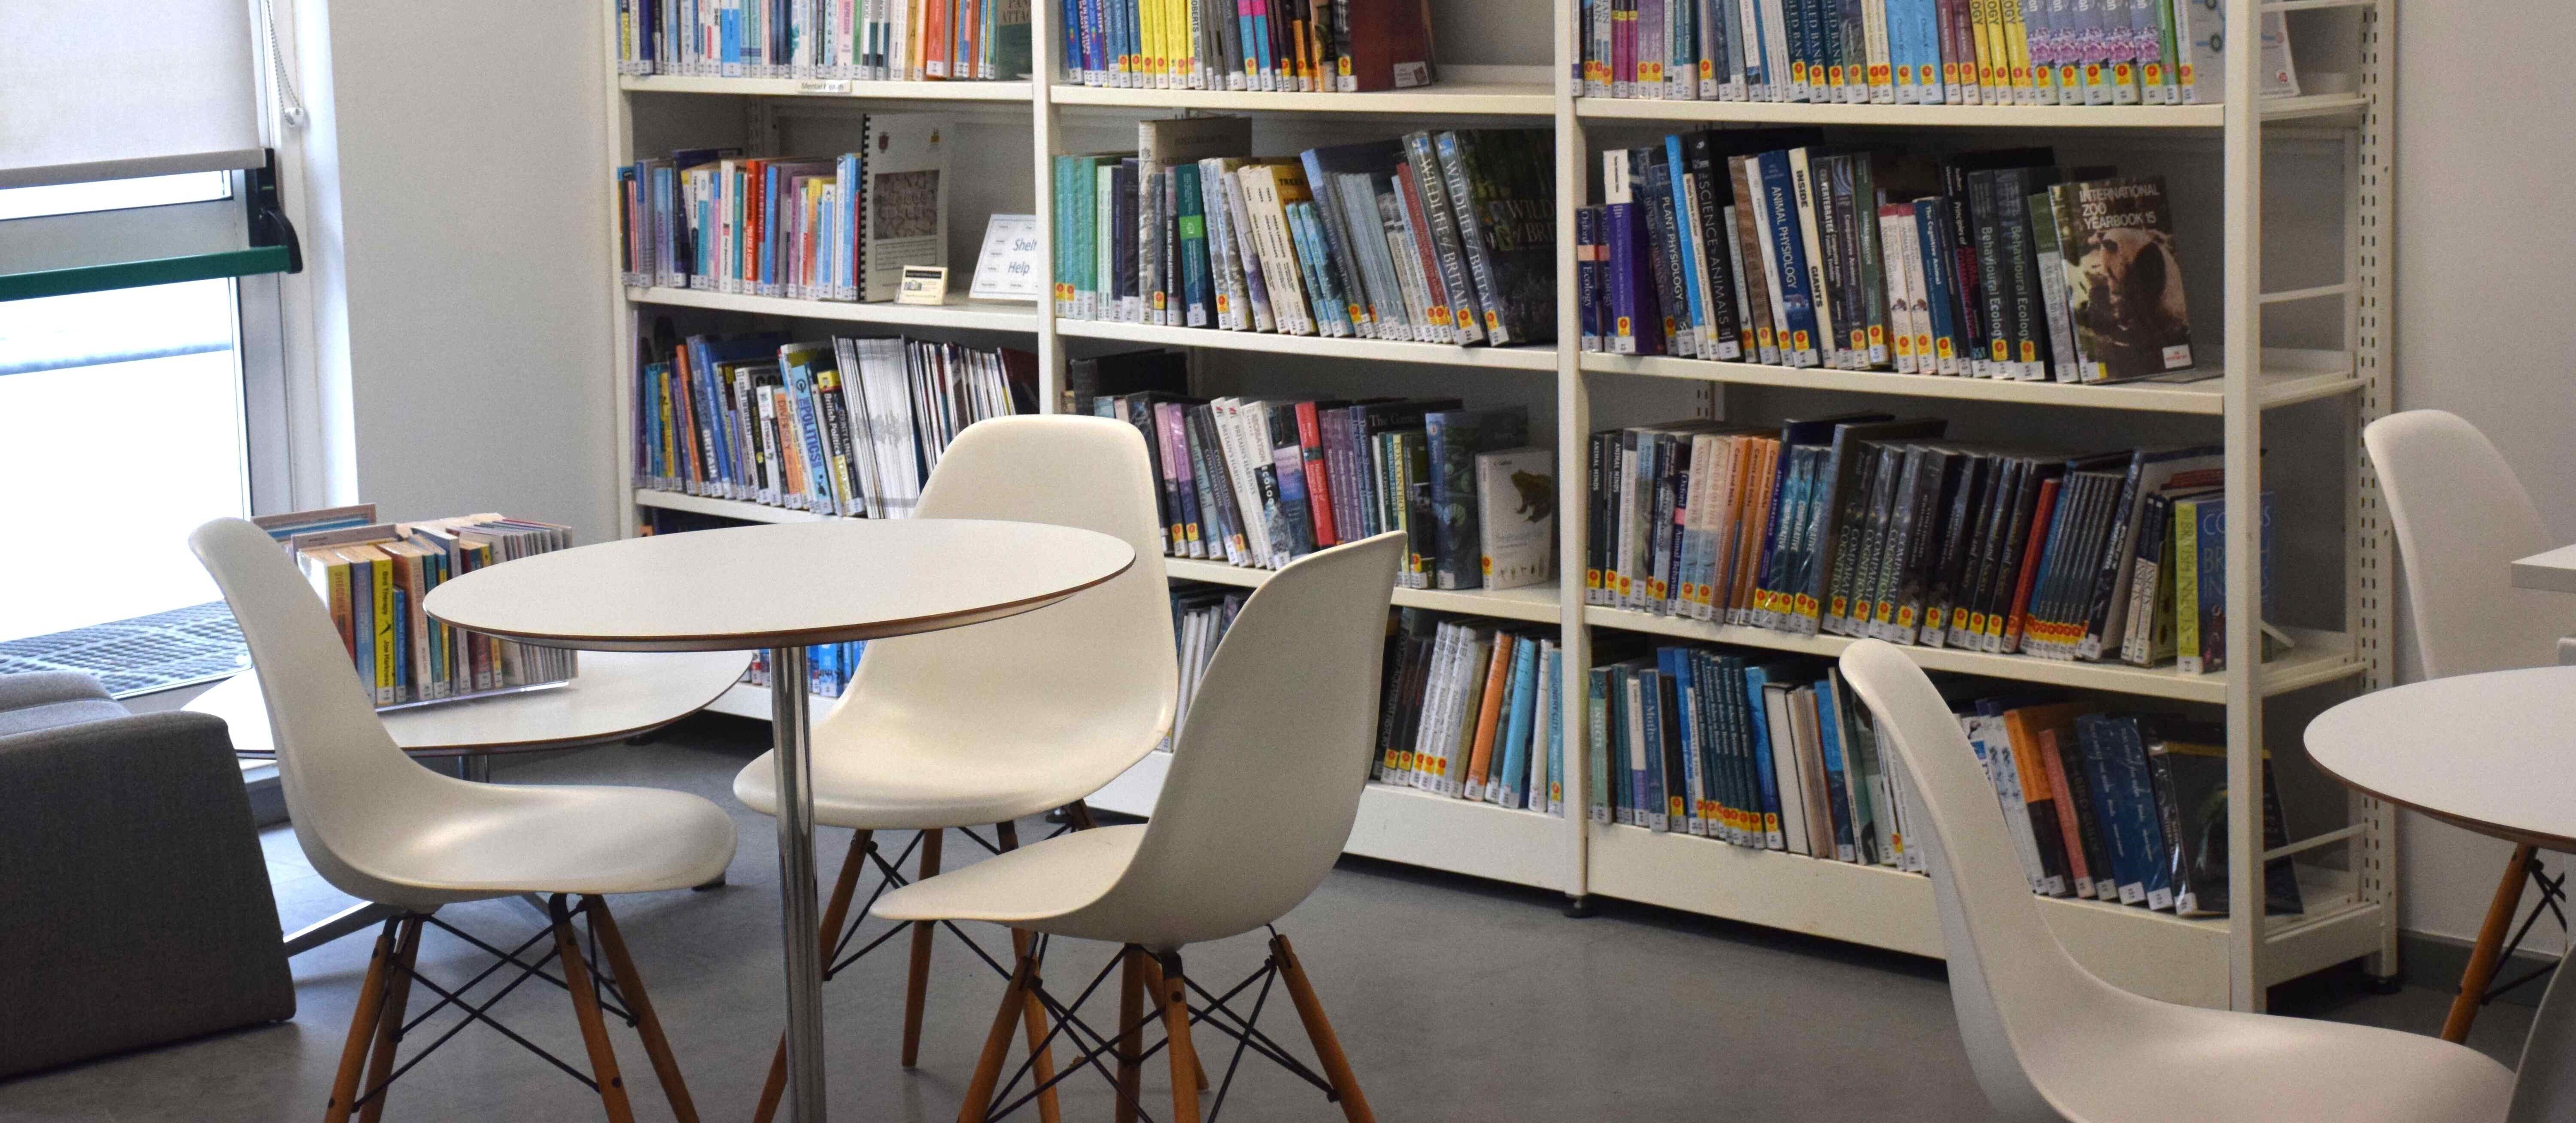 Books and tables in the learning resource centre